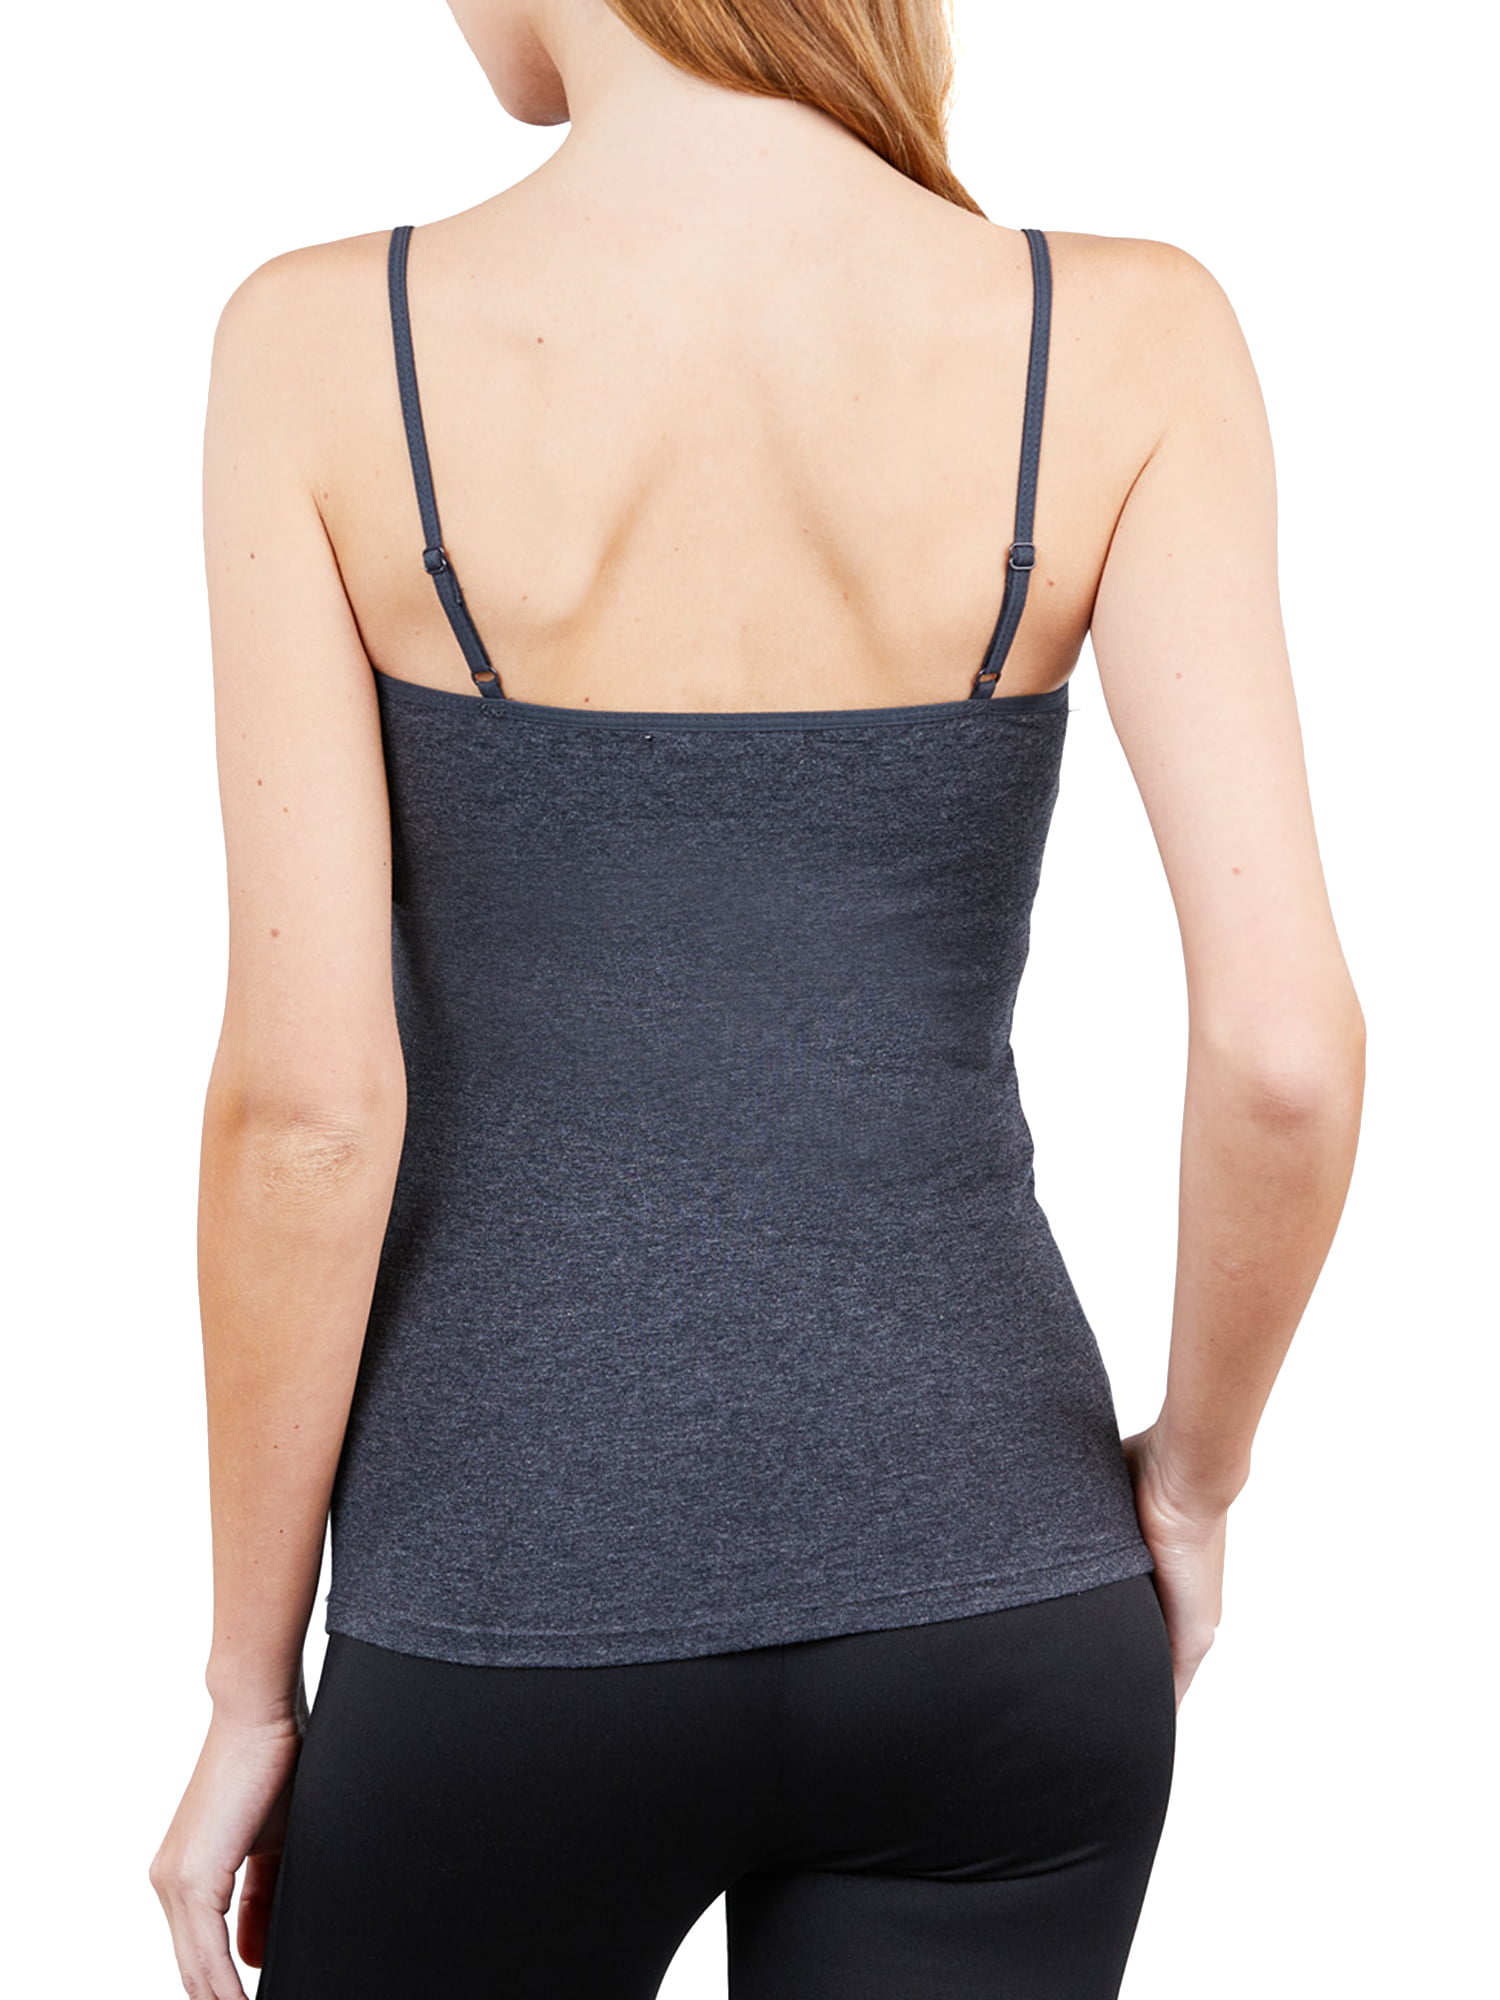 Juniors Solid Plain Adjustable Spaghetti Strap Layering Cropped Camisole  Tank Top (Charcoal Grey/Charcoal Grey, M) 